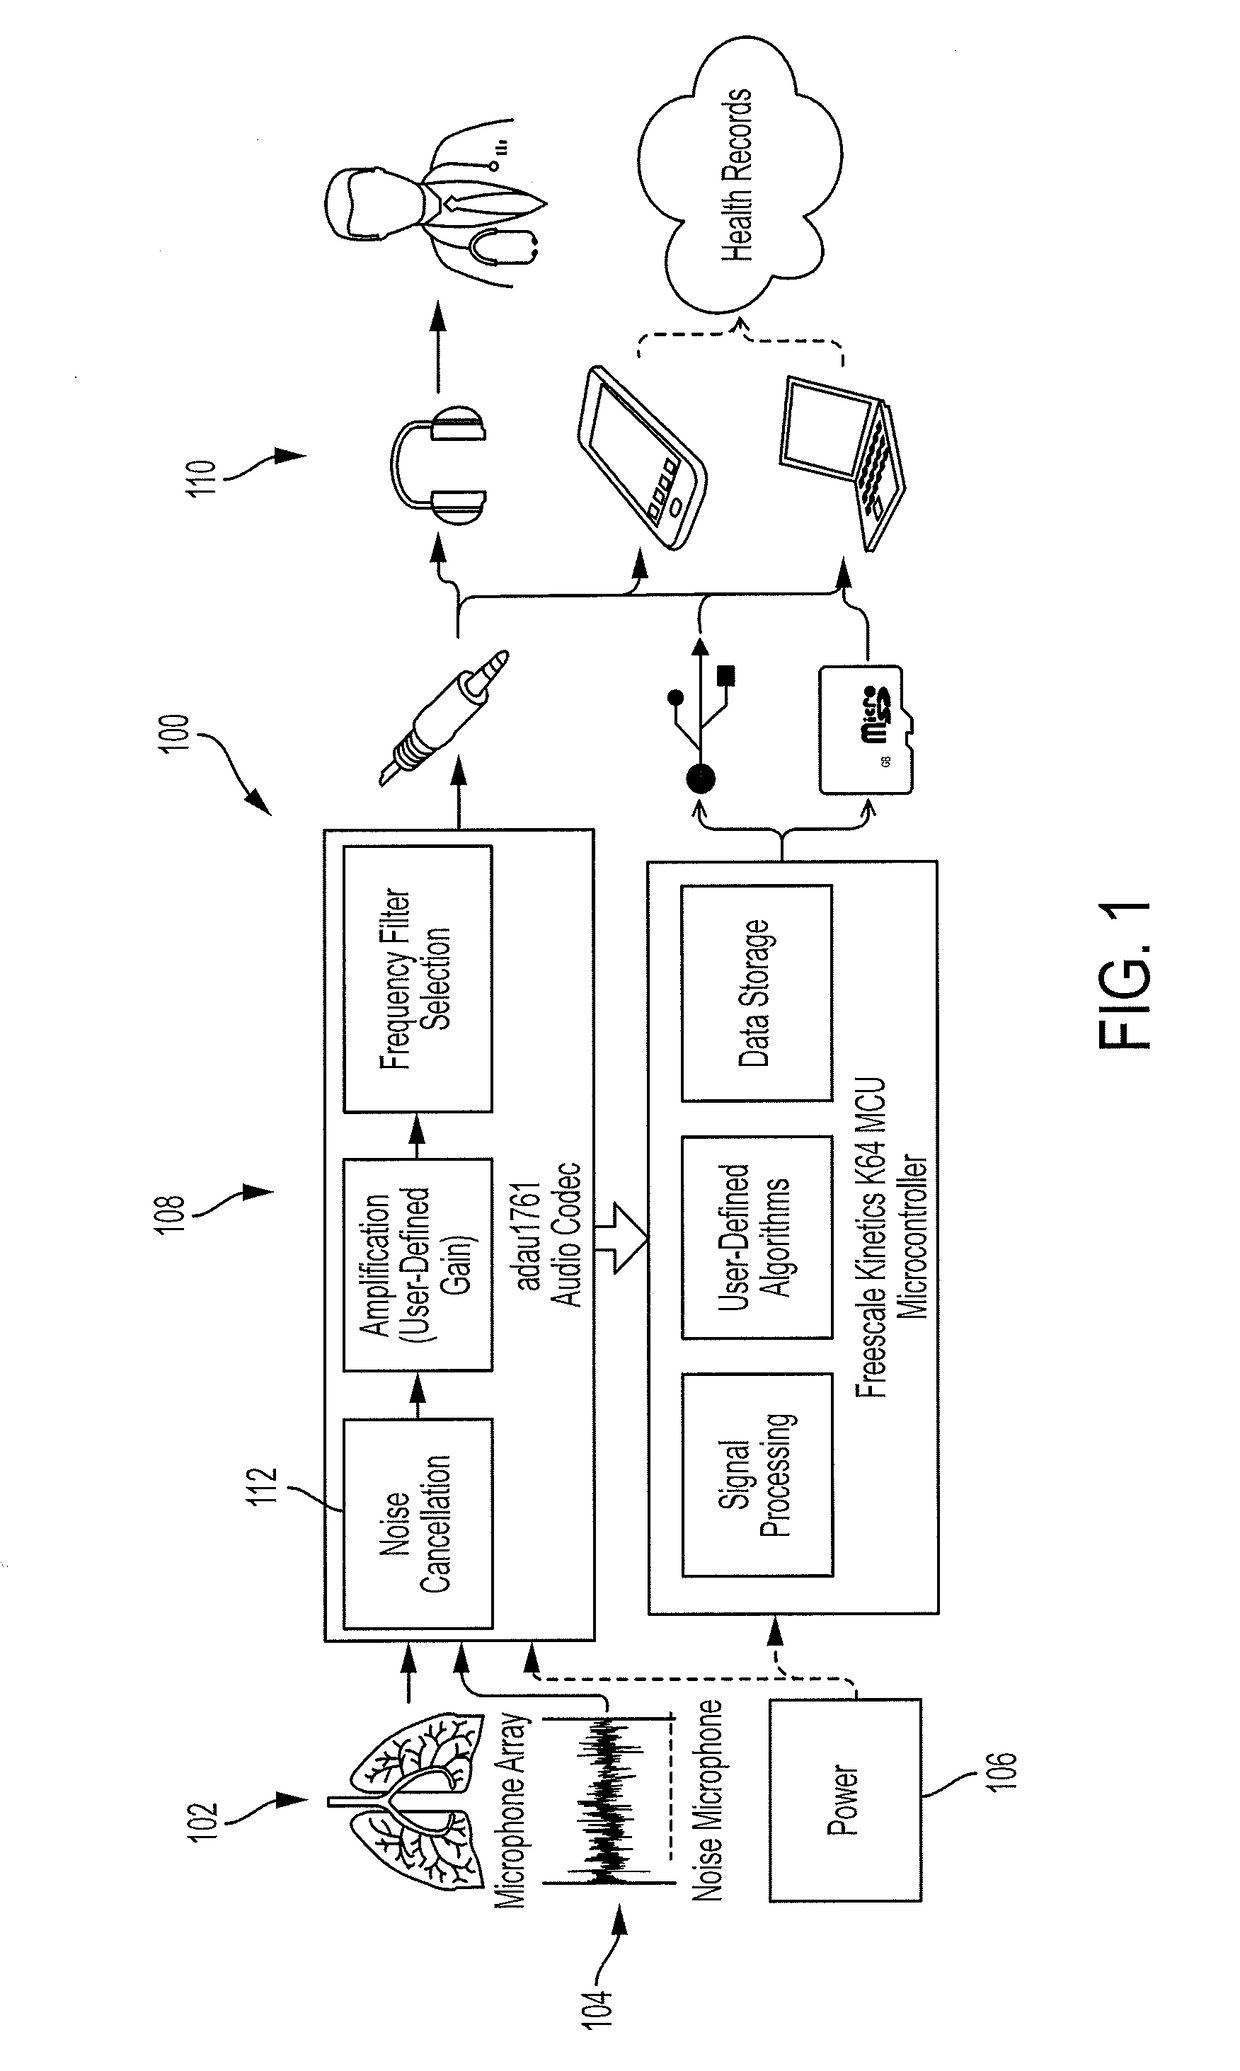 Programmable electronic stethoscope devices, algorithms, systems, and methods